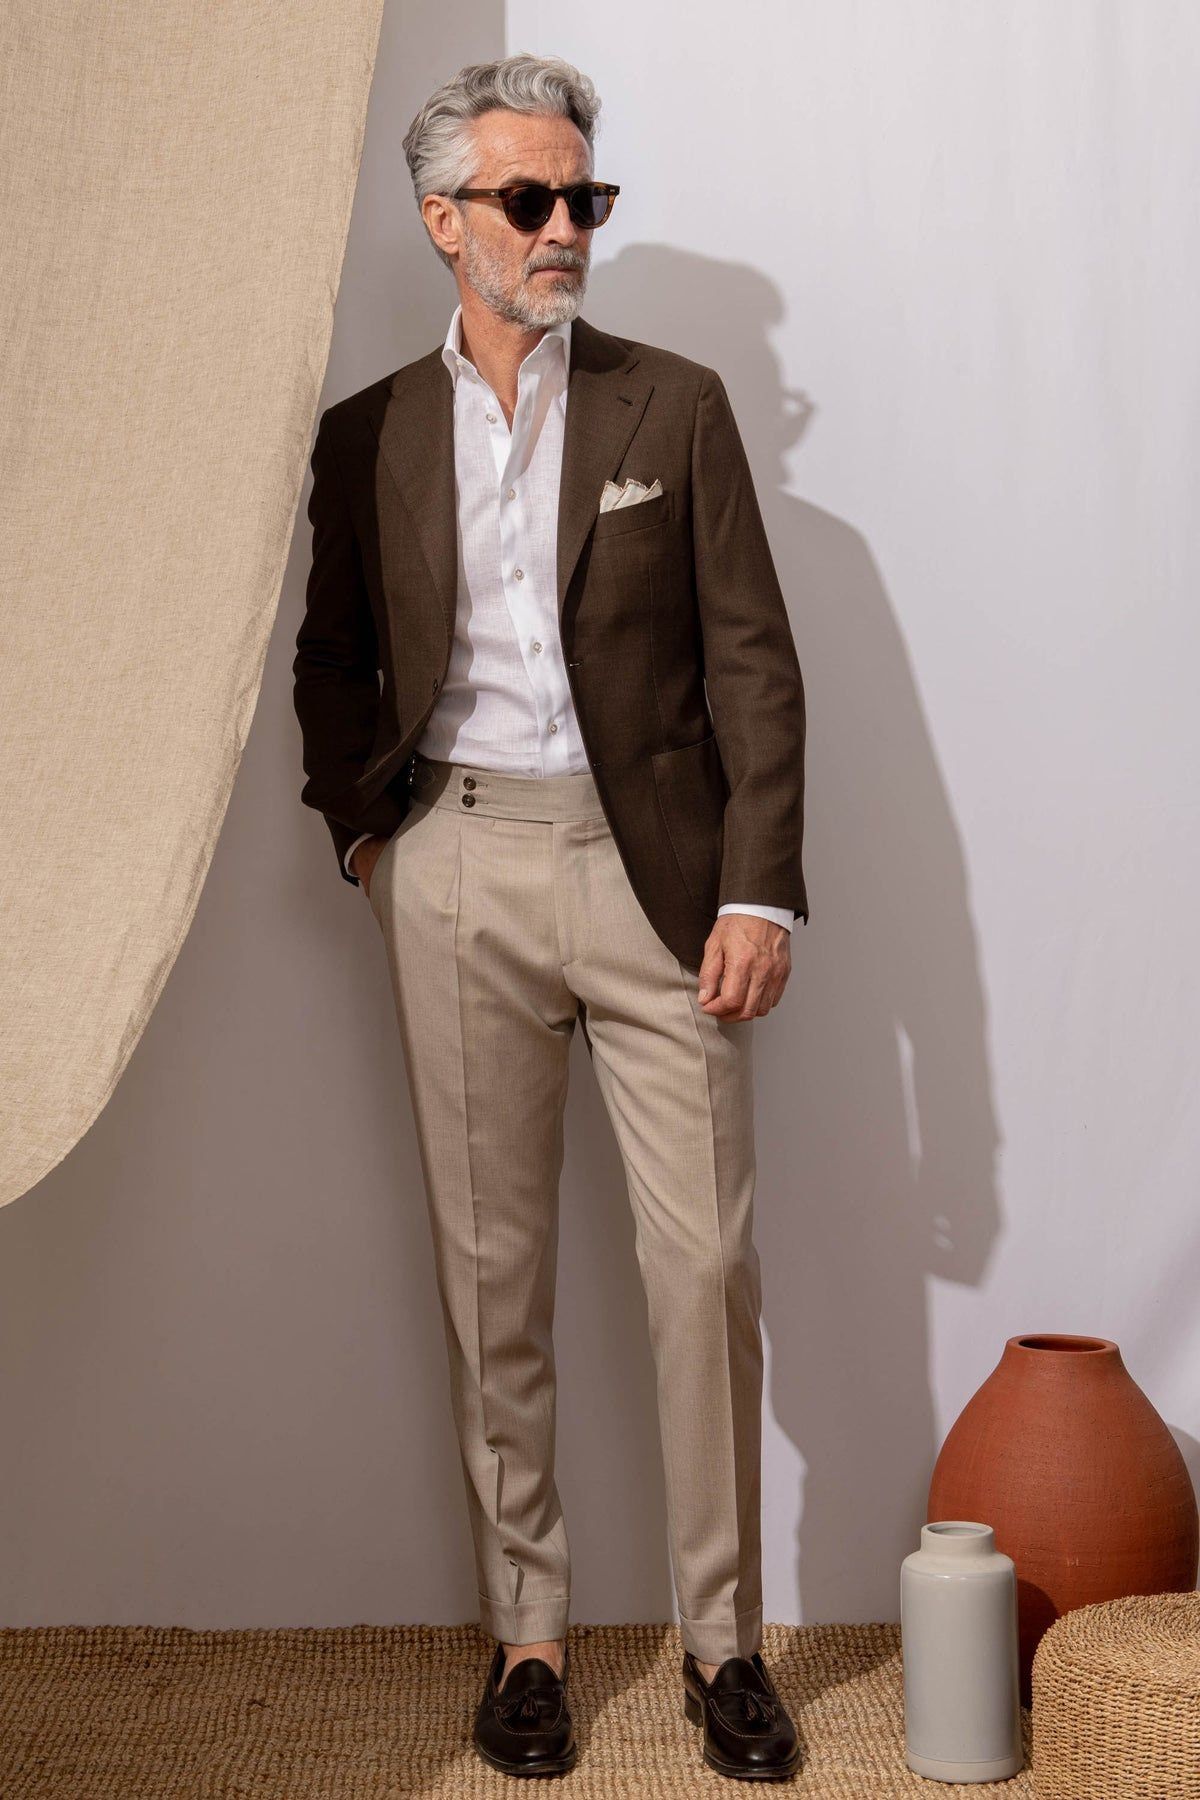 Summer Suits For Men With Cool Texture
And Color